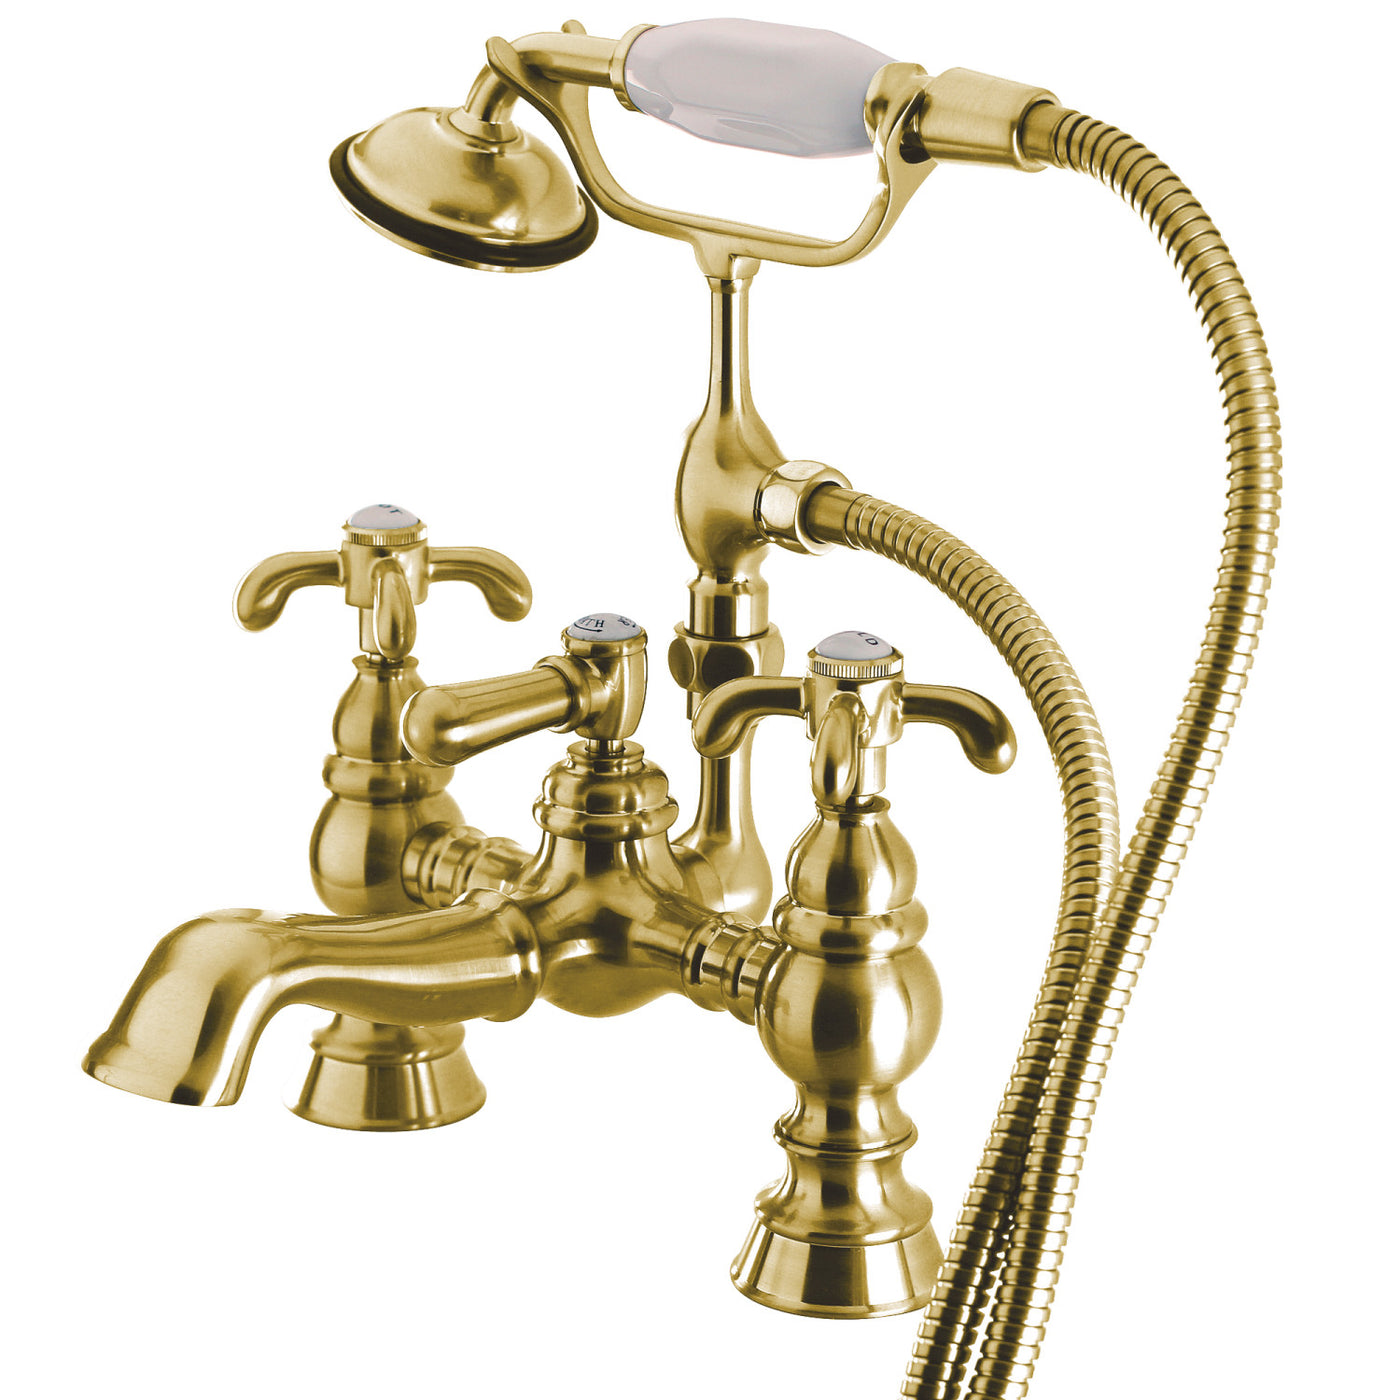 Elements of Design DT11522VX 7-Inch Deck Mount Tub Faucet with Hand Shower, Polished Brass